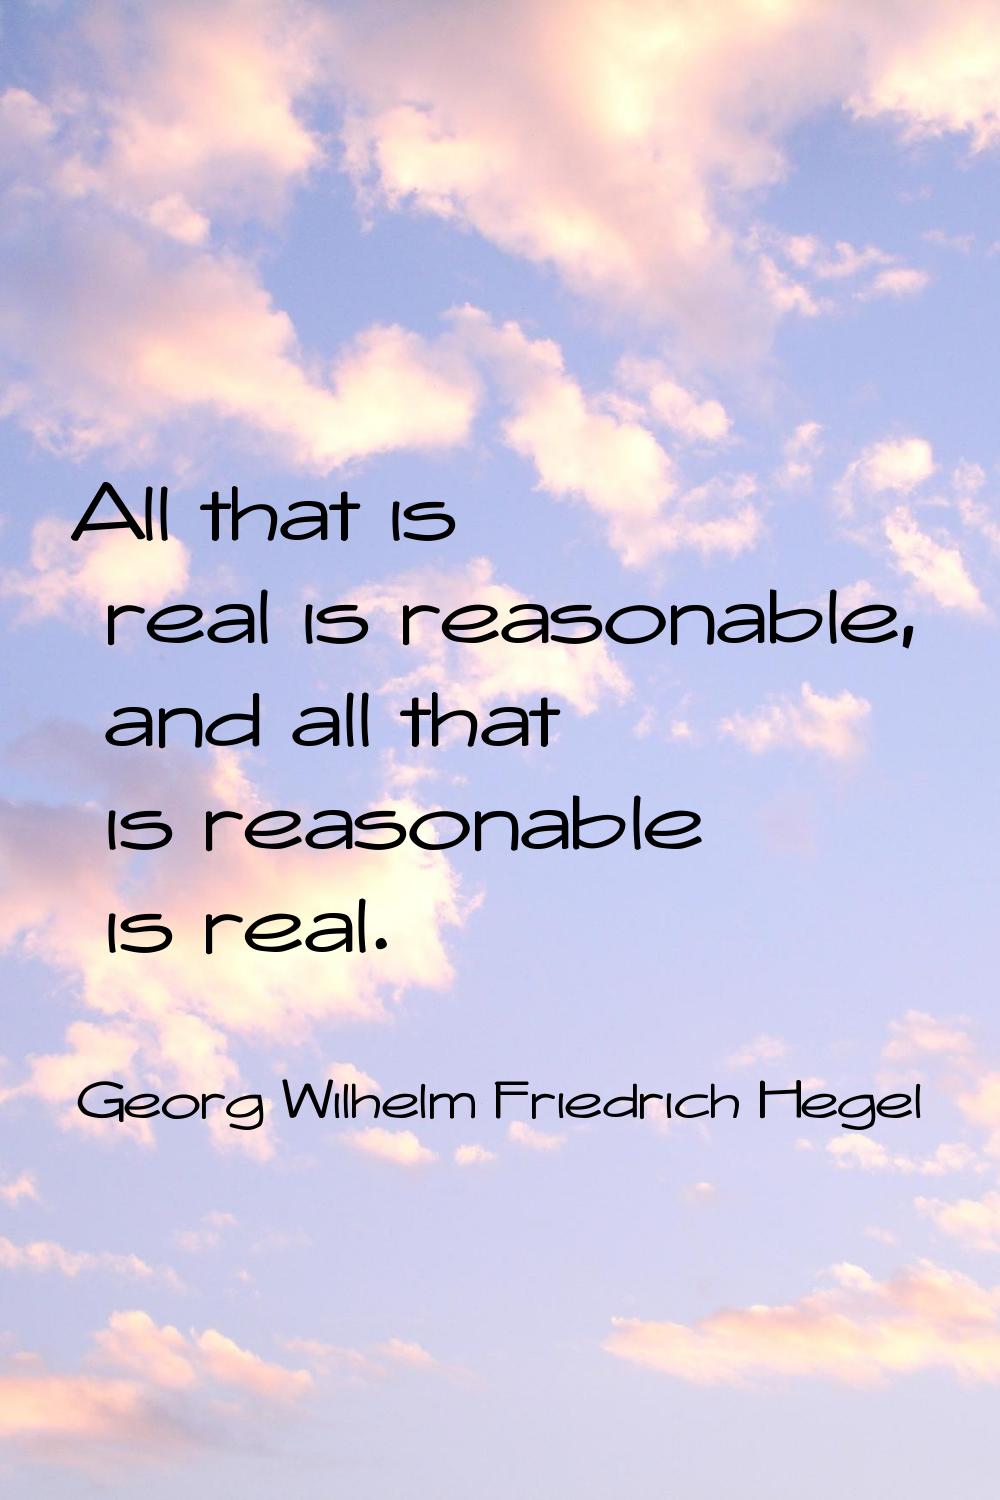 All that is real is reasonable, and all that is reasonable is real.